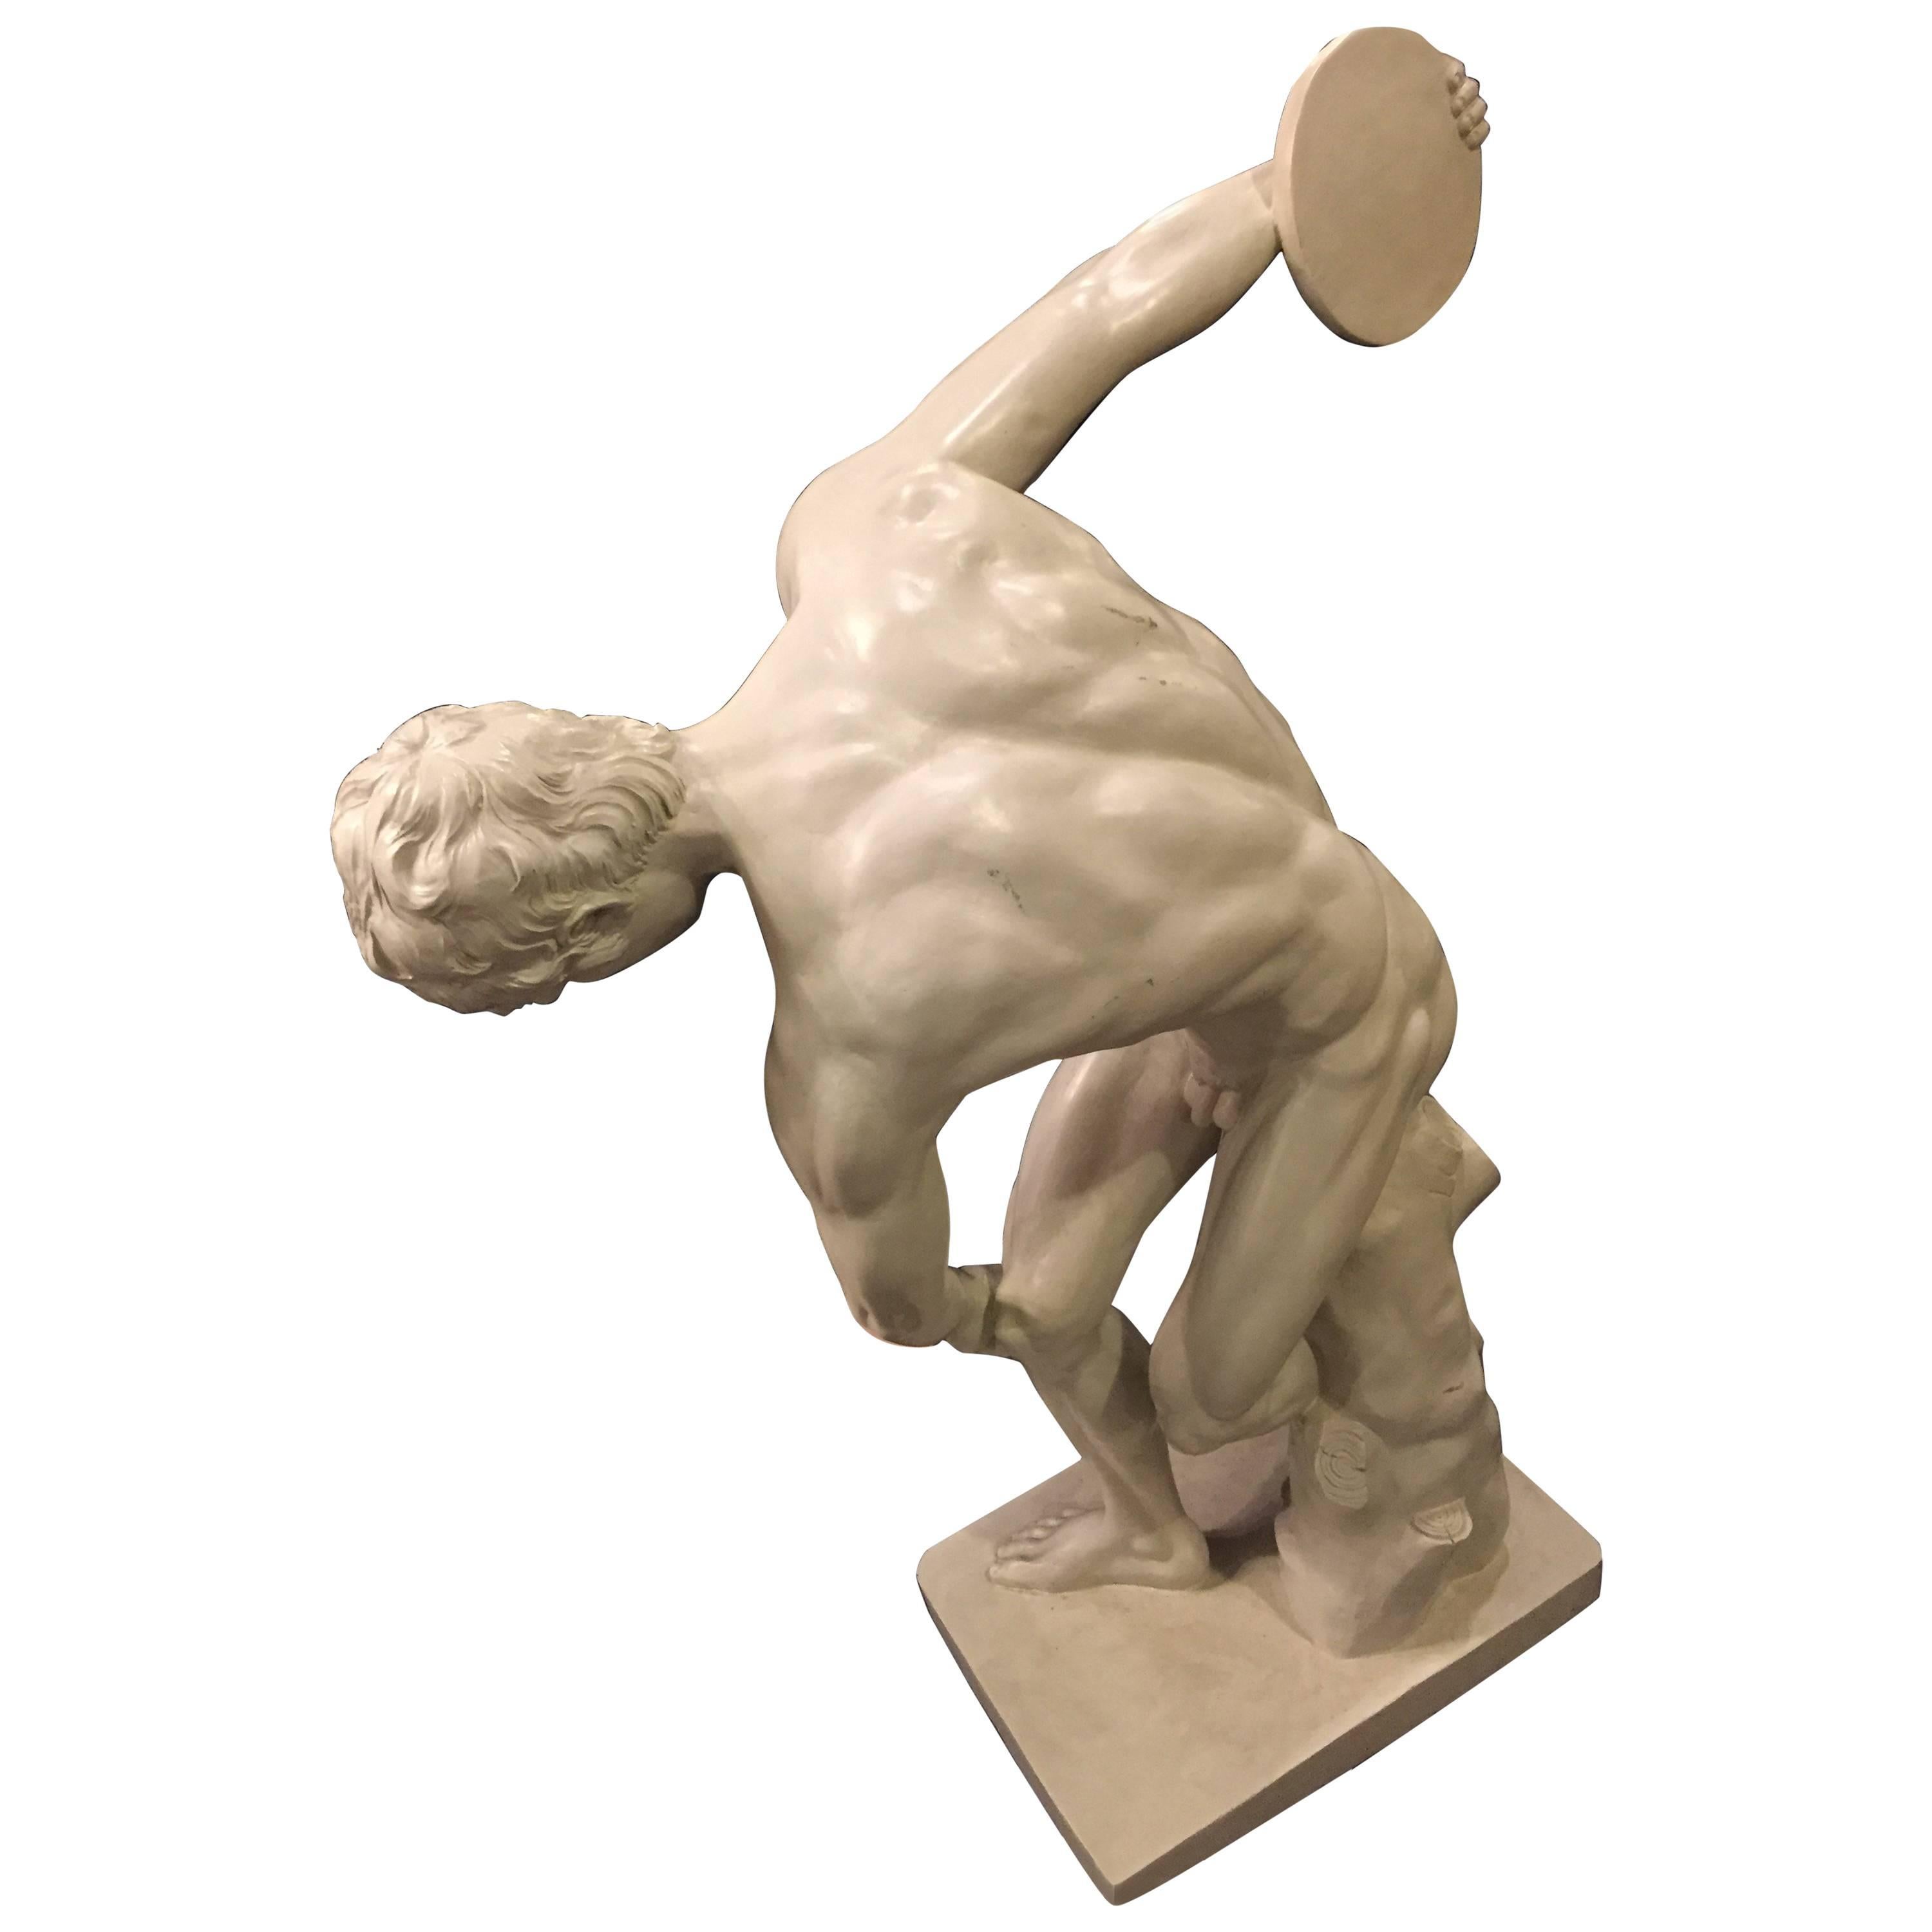 Fiberglass life-sized discus thrower sculpture. This finely detailed sculpture is of a naked discus thrower with all parts in tact. This life-sized piece is sure to add controversy to any room in the home or office.